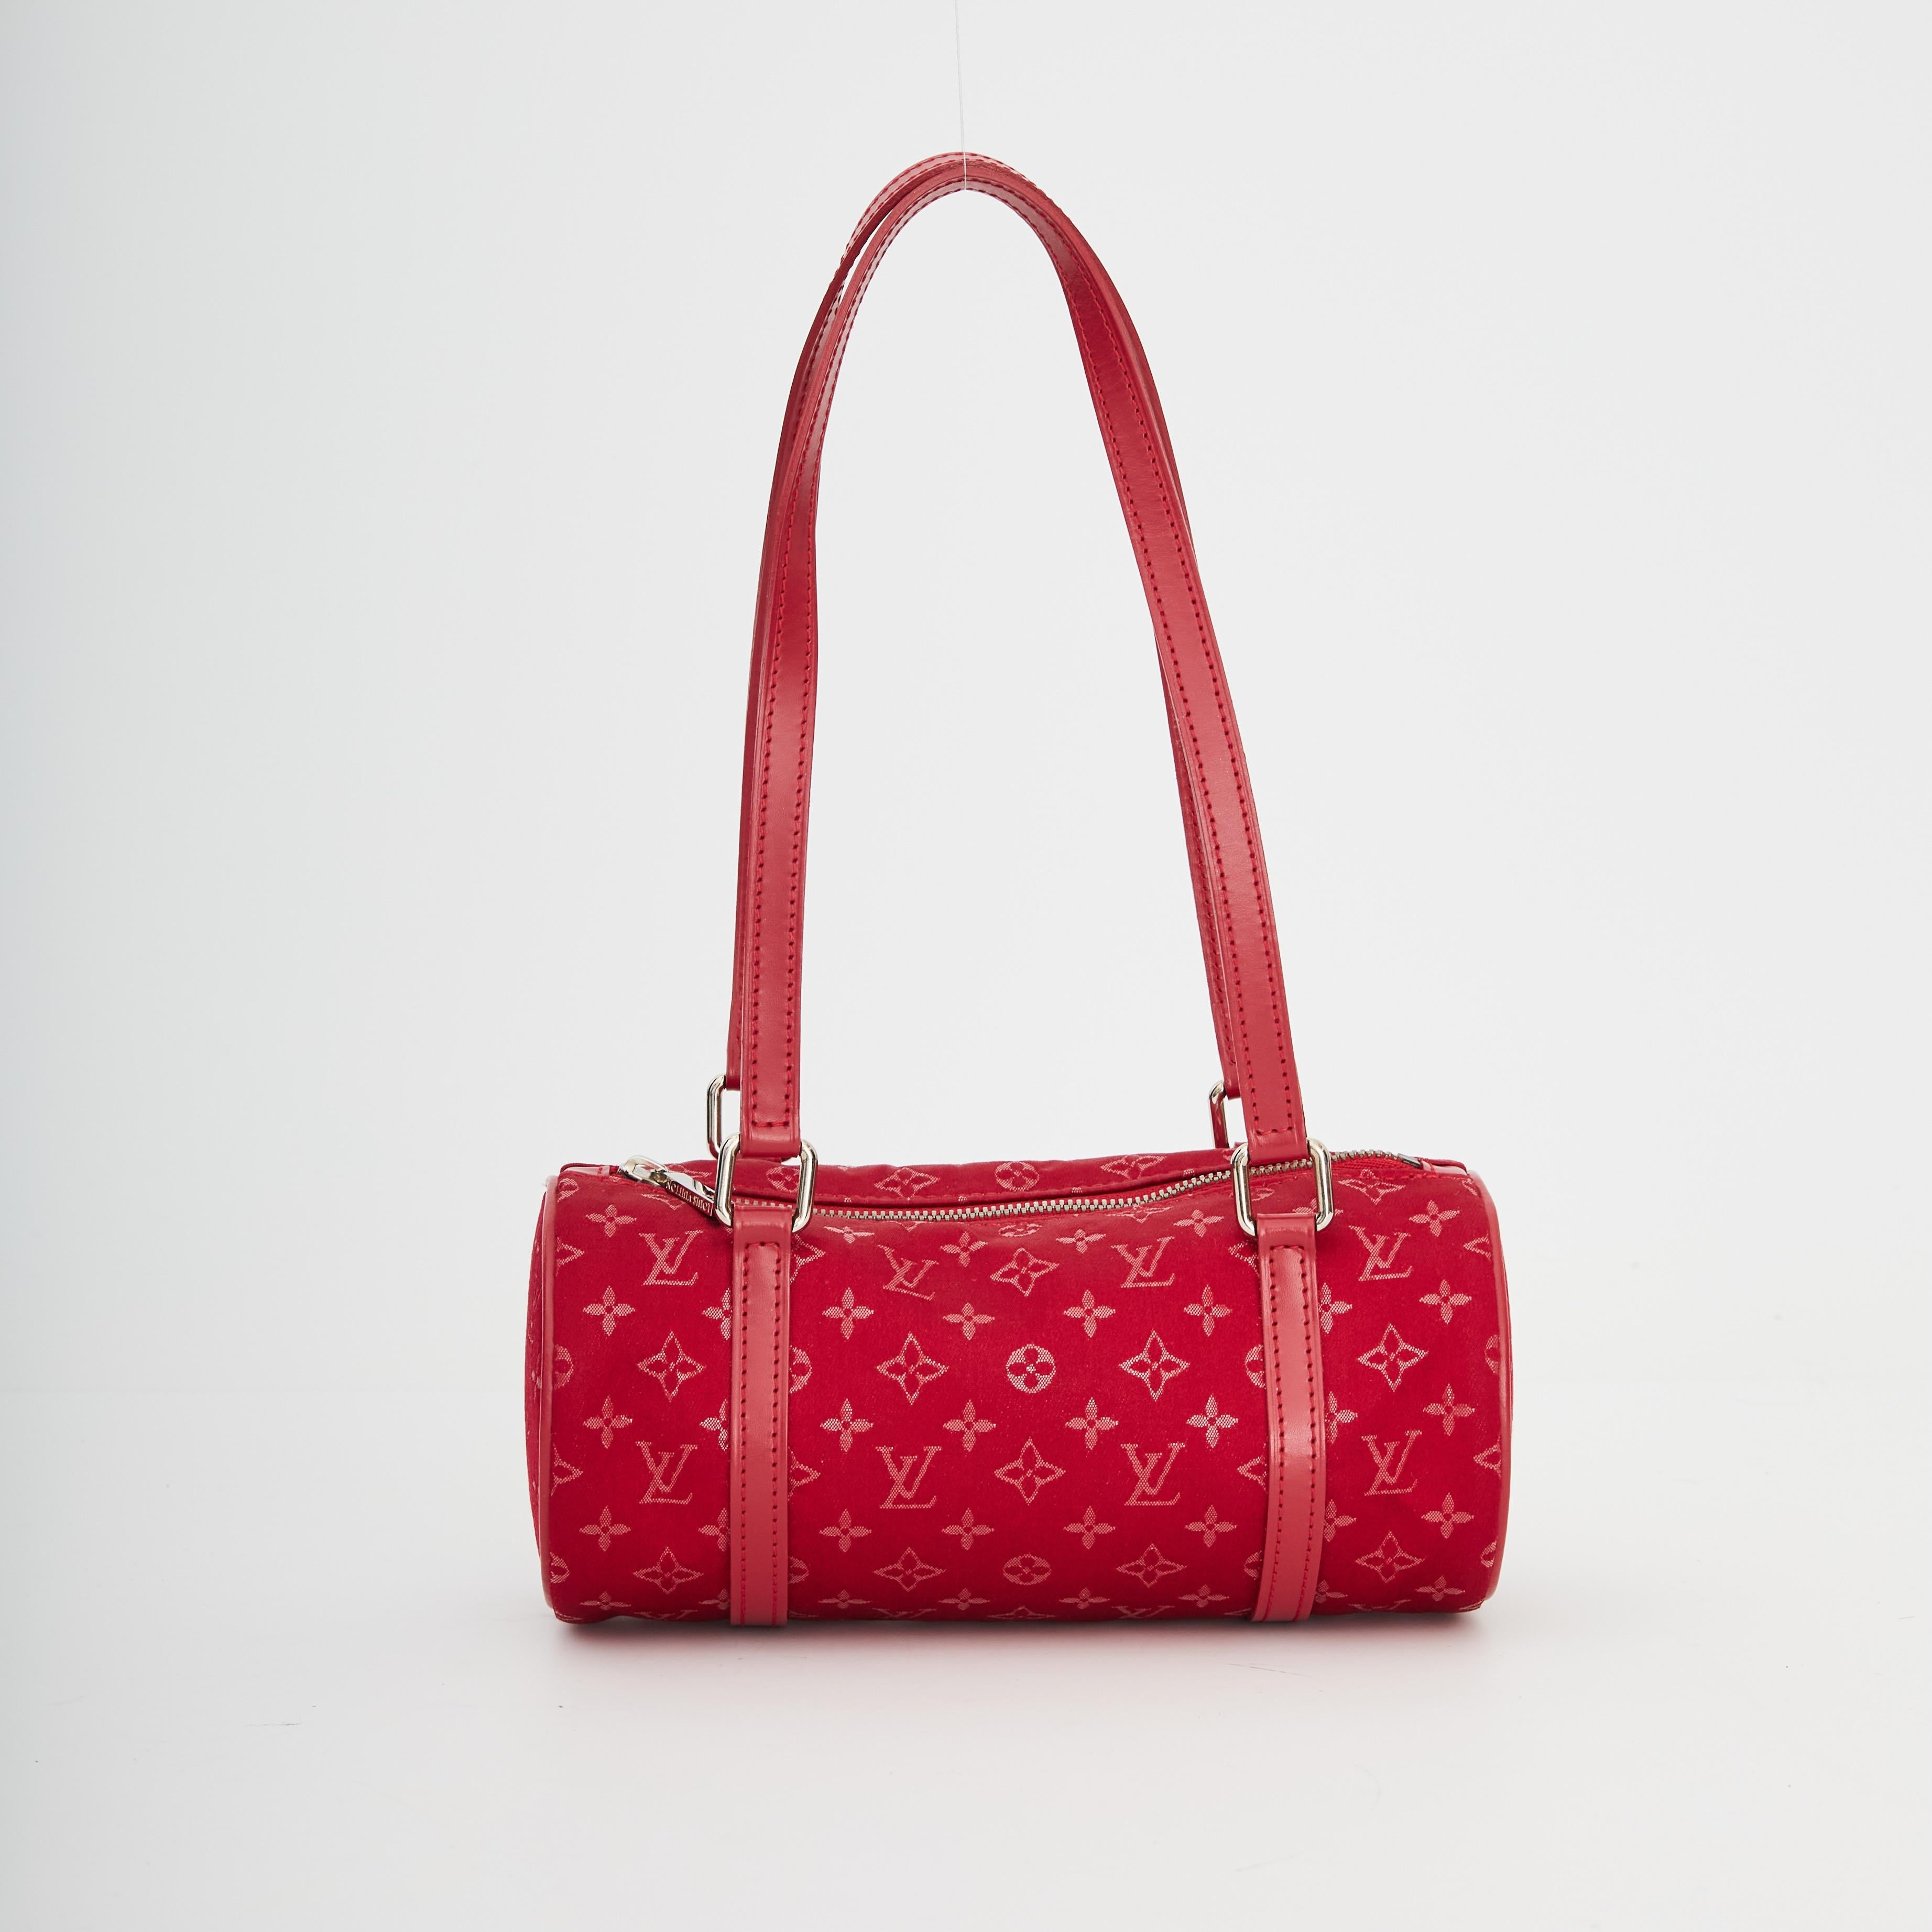 Louis Vuitton pre-loved mini Papillon handbag in a red monogram satin featuring red leather flat top handles, rolled leather trim, top zip closure and gunmetal silver-tone hardware.

COLOR: Red
MATERIAL: Satin
DATE CODE: TH1002
MEASURES: H 3.25” x L